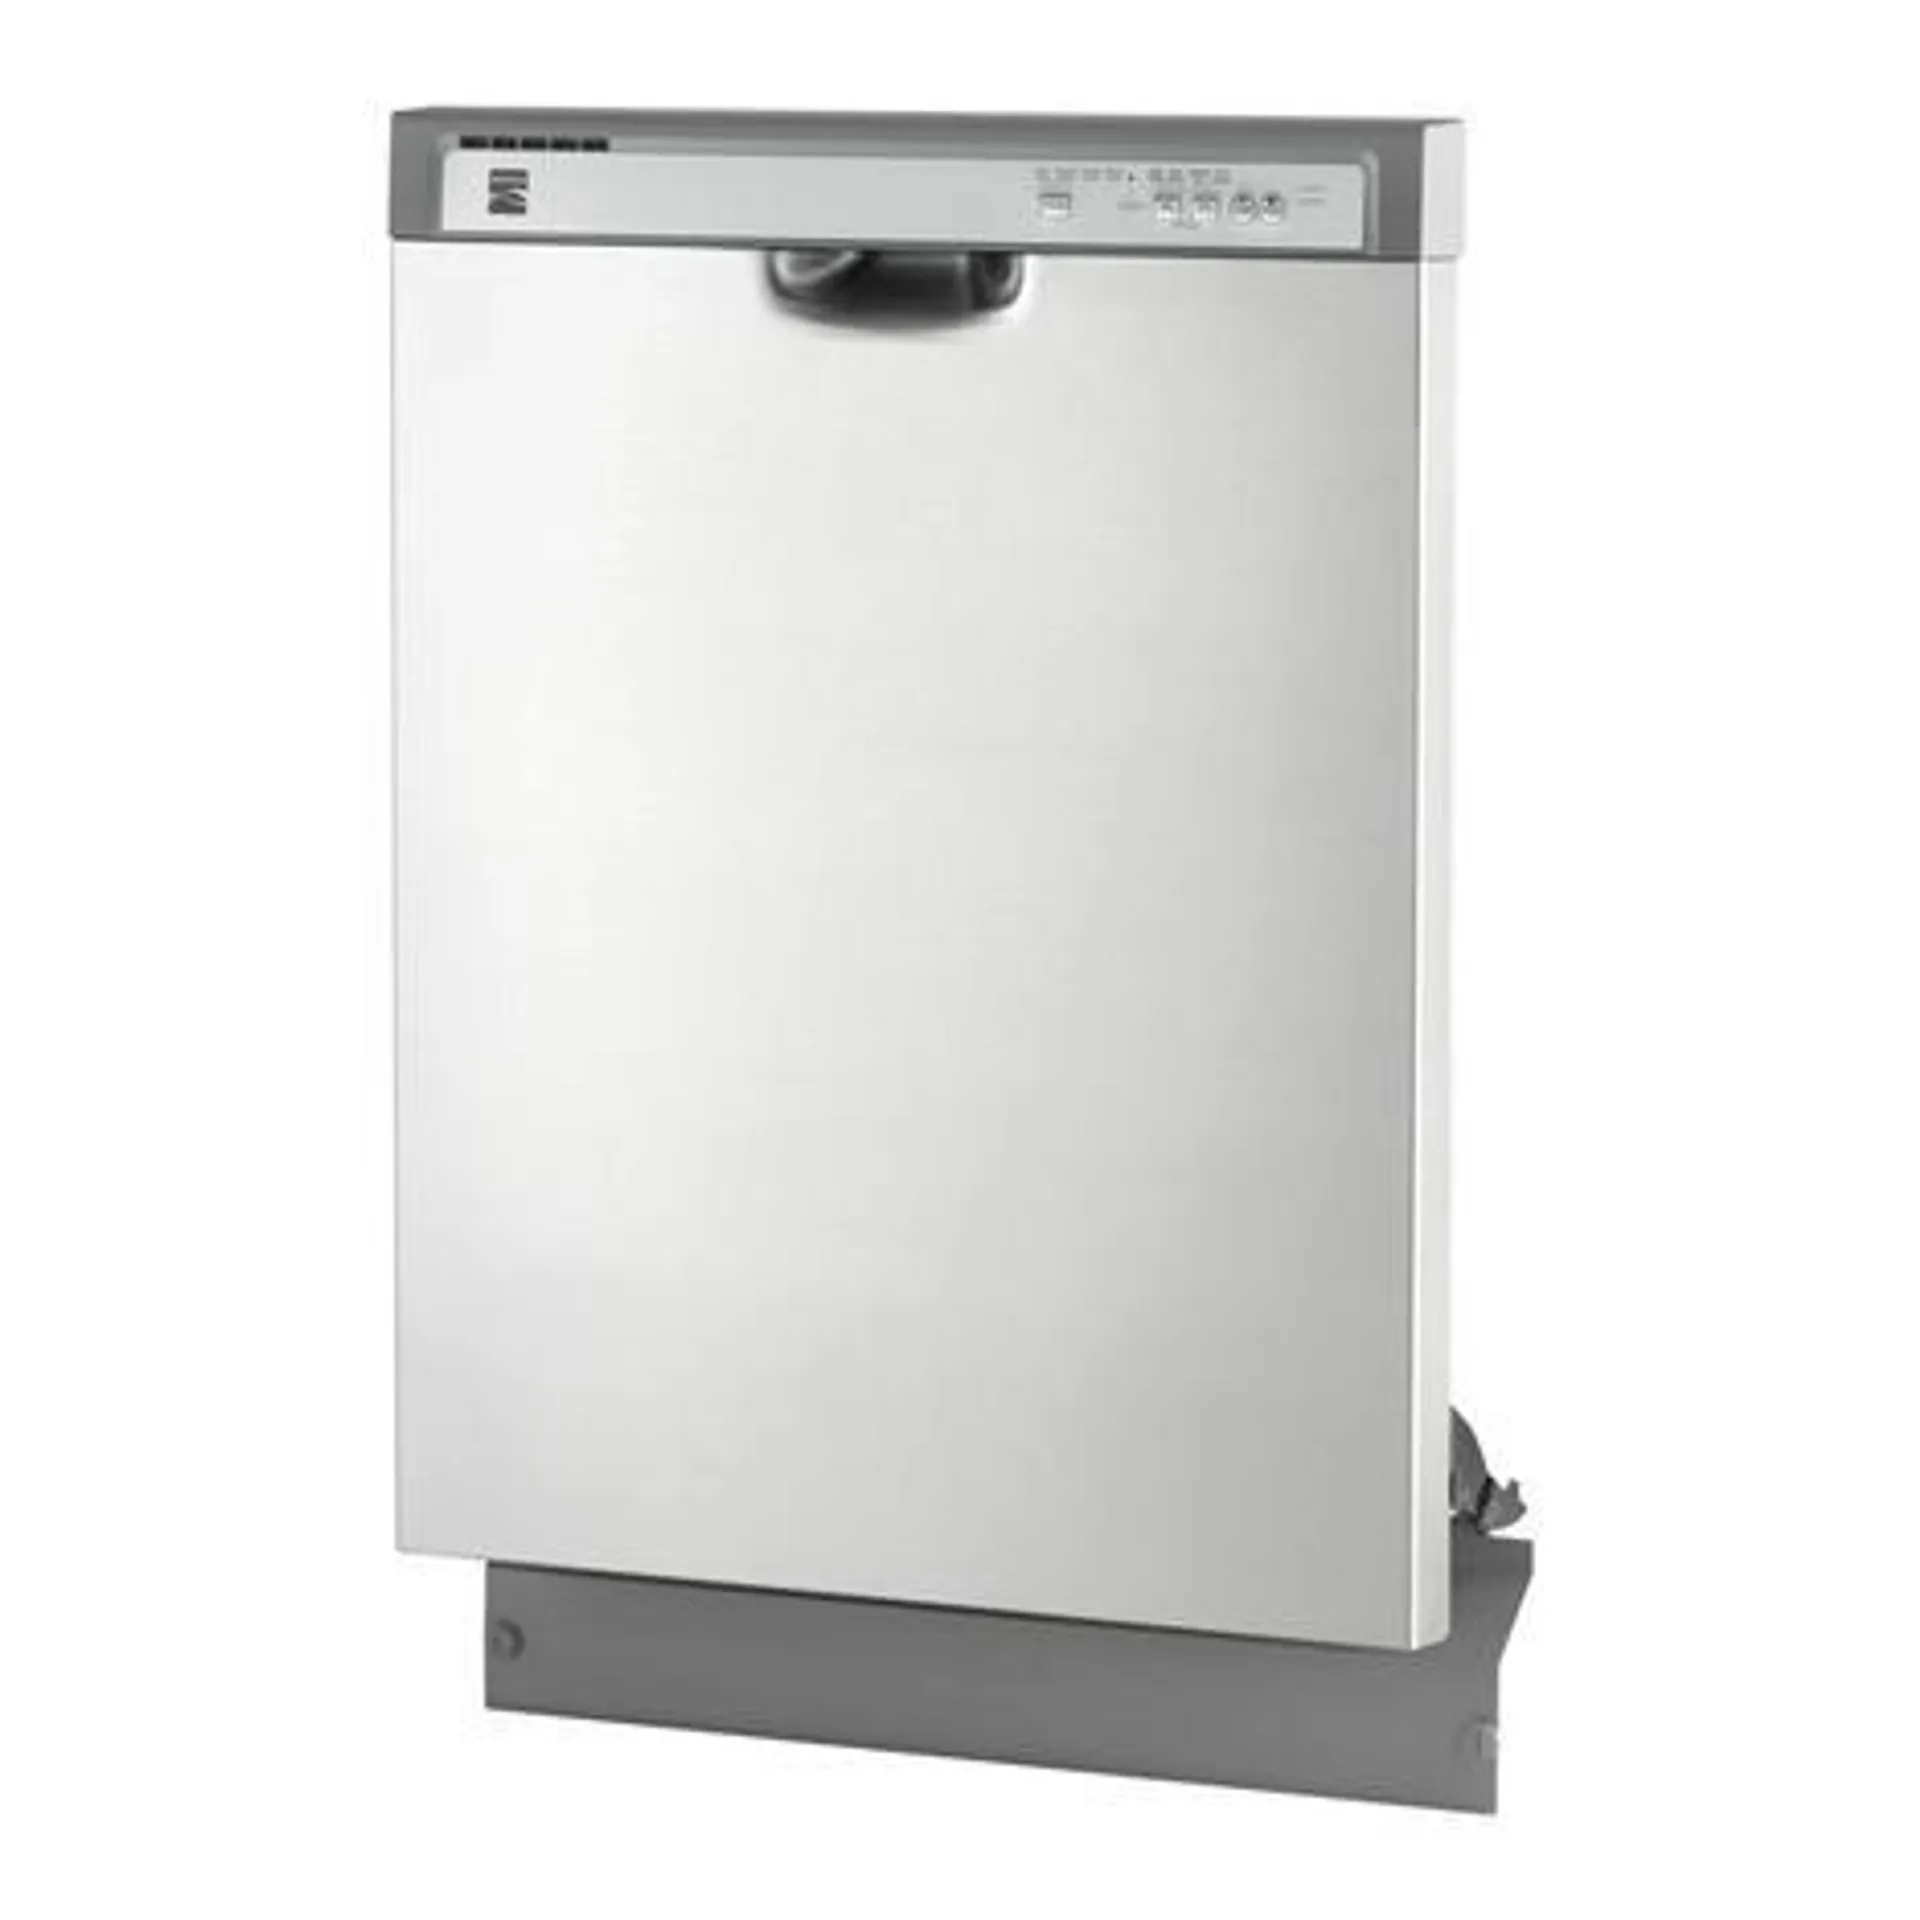 Kenmore 14503 24" Built-In Dishwasher with Heated Dry - Stainless Steel